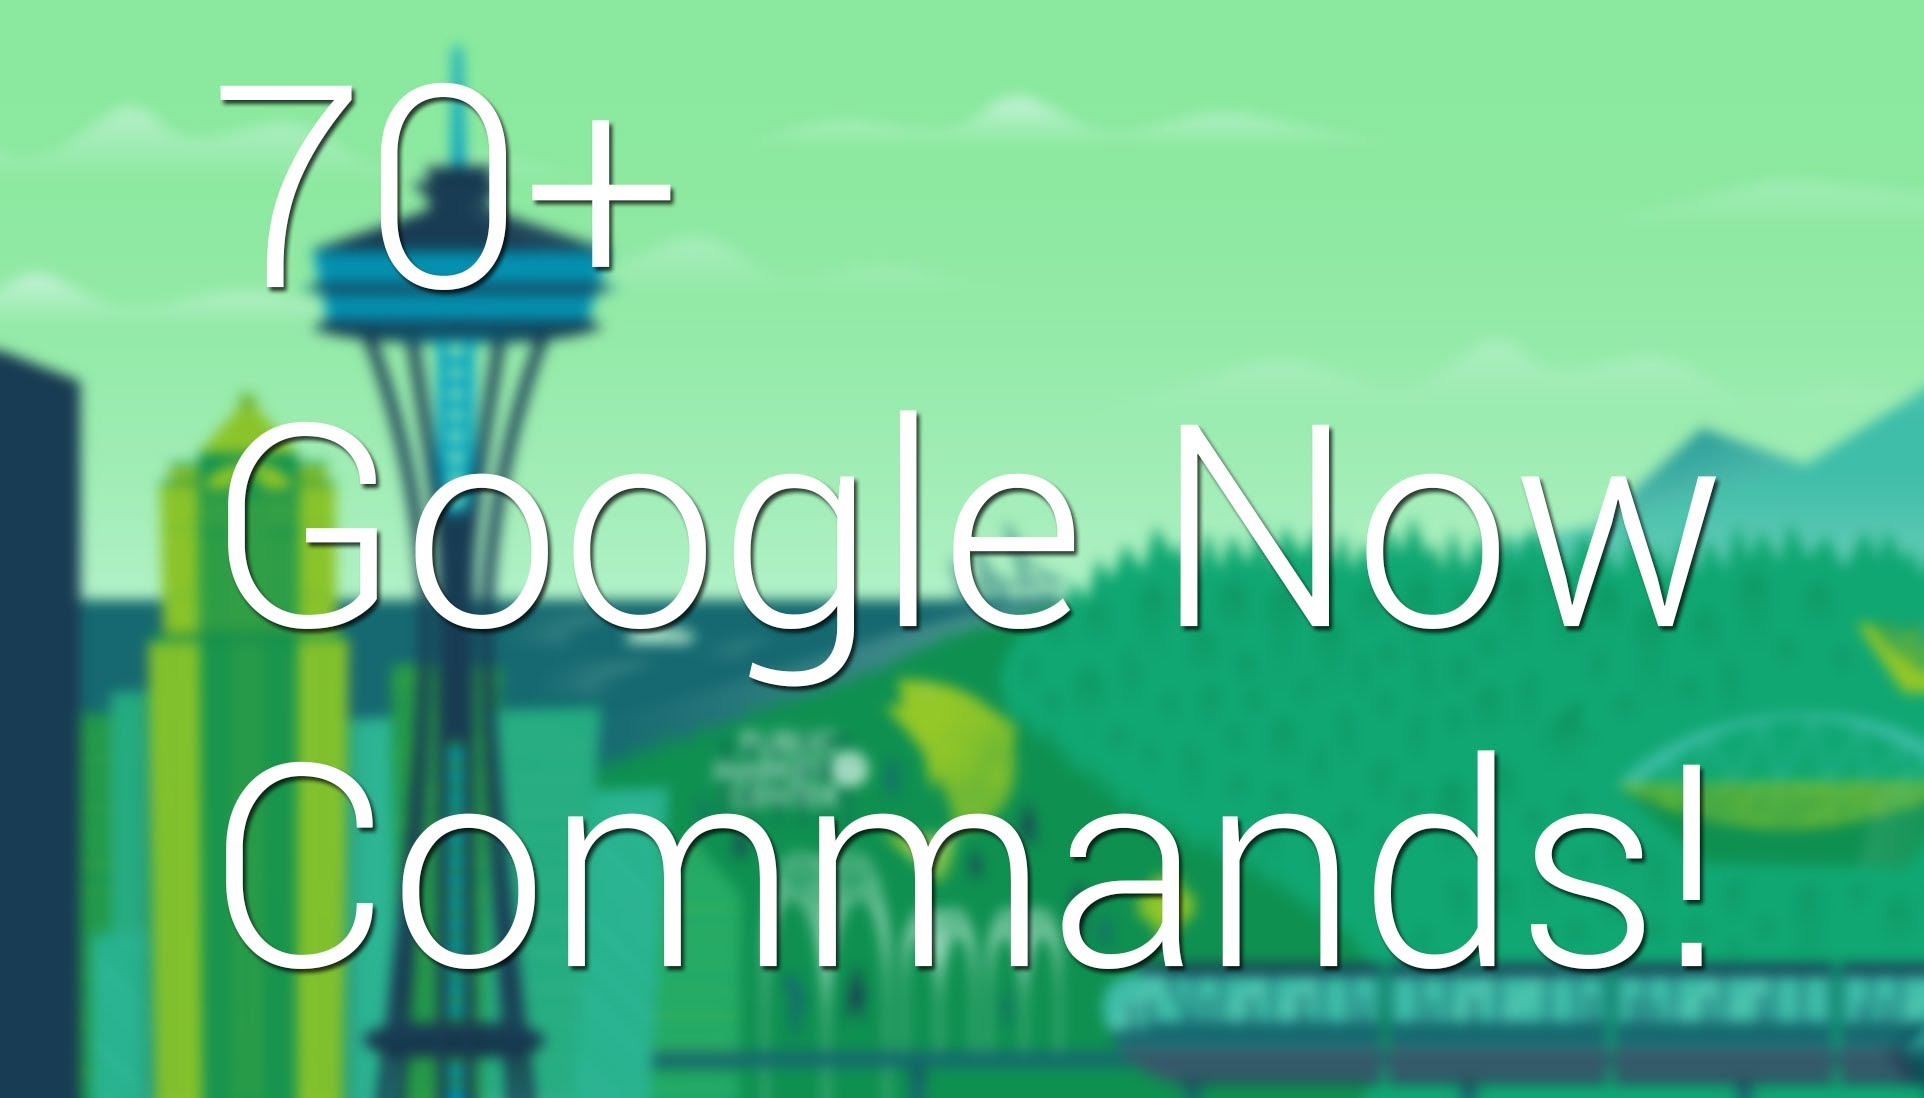 List Of 70+ Cool Google Now Voice Commands, You Probably Don't Know